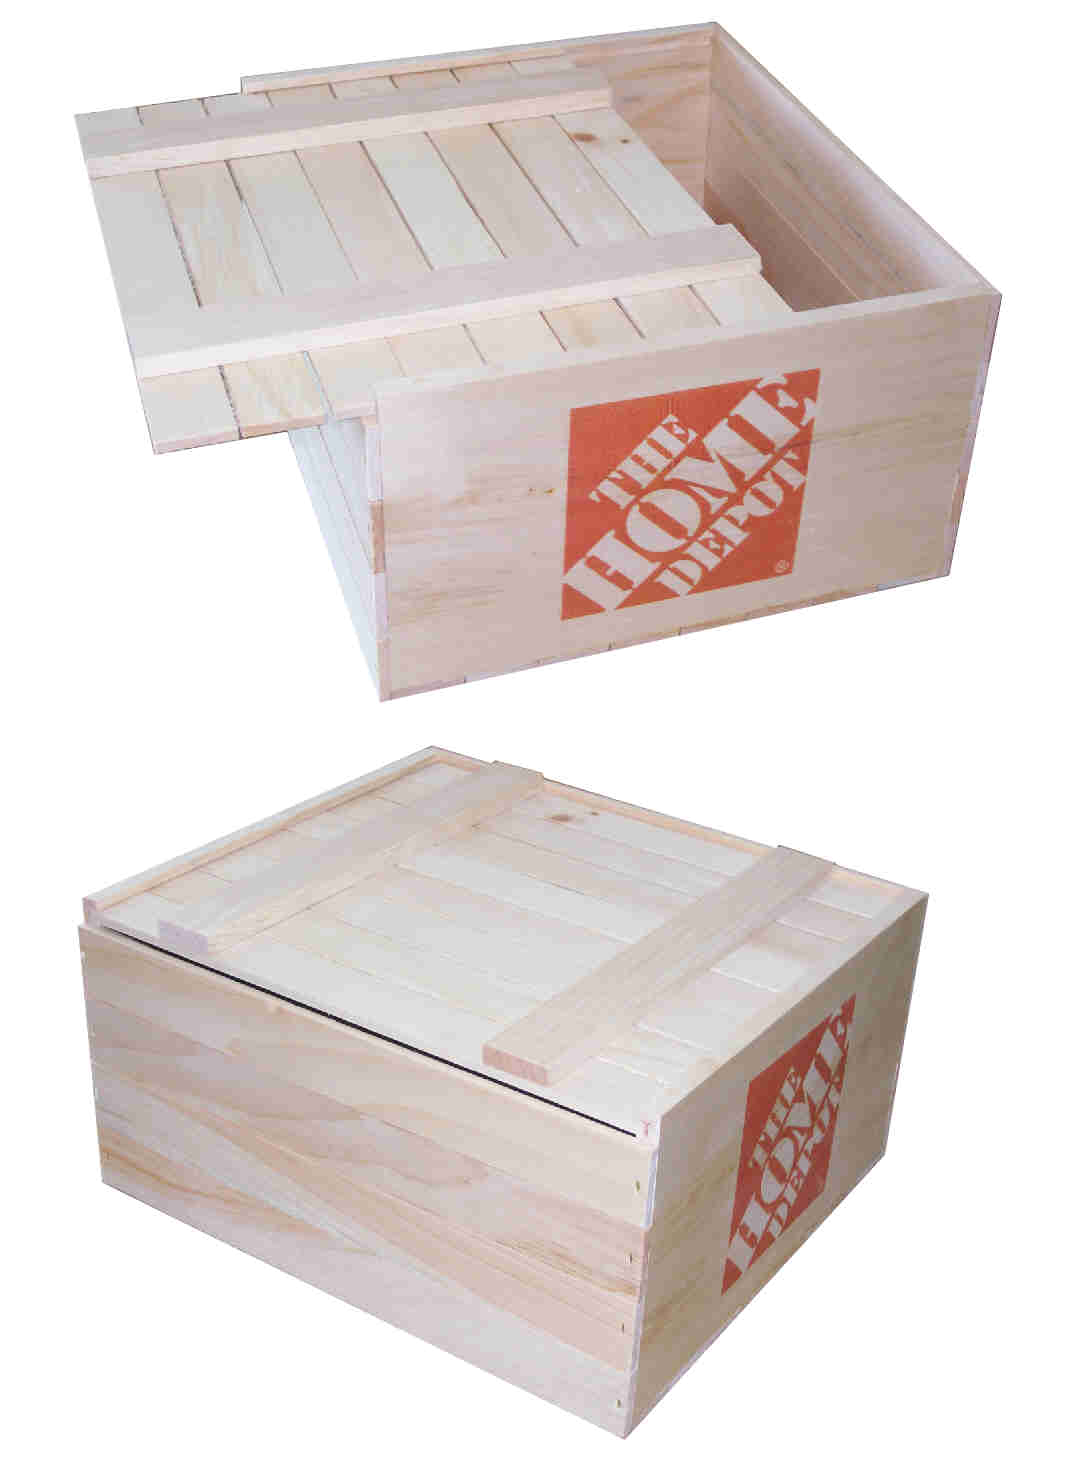 pine crates like this are an inexpensive alternitive to the old woven basket 